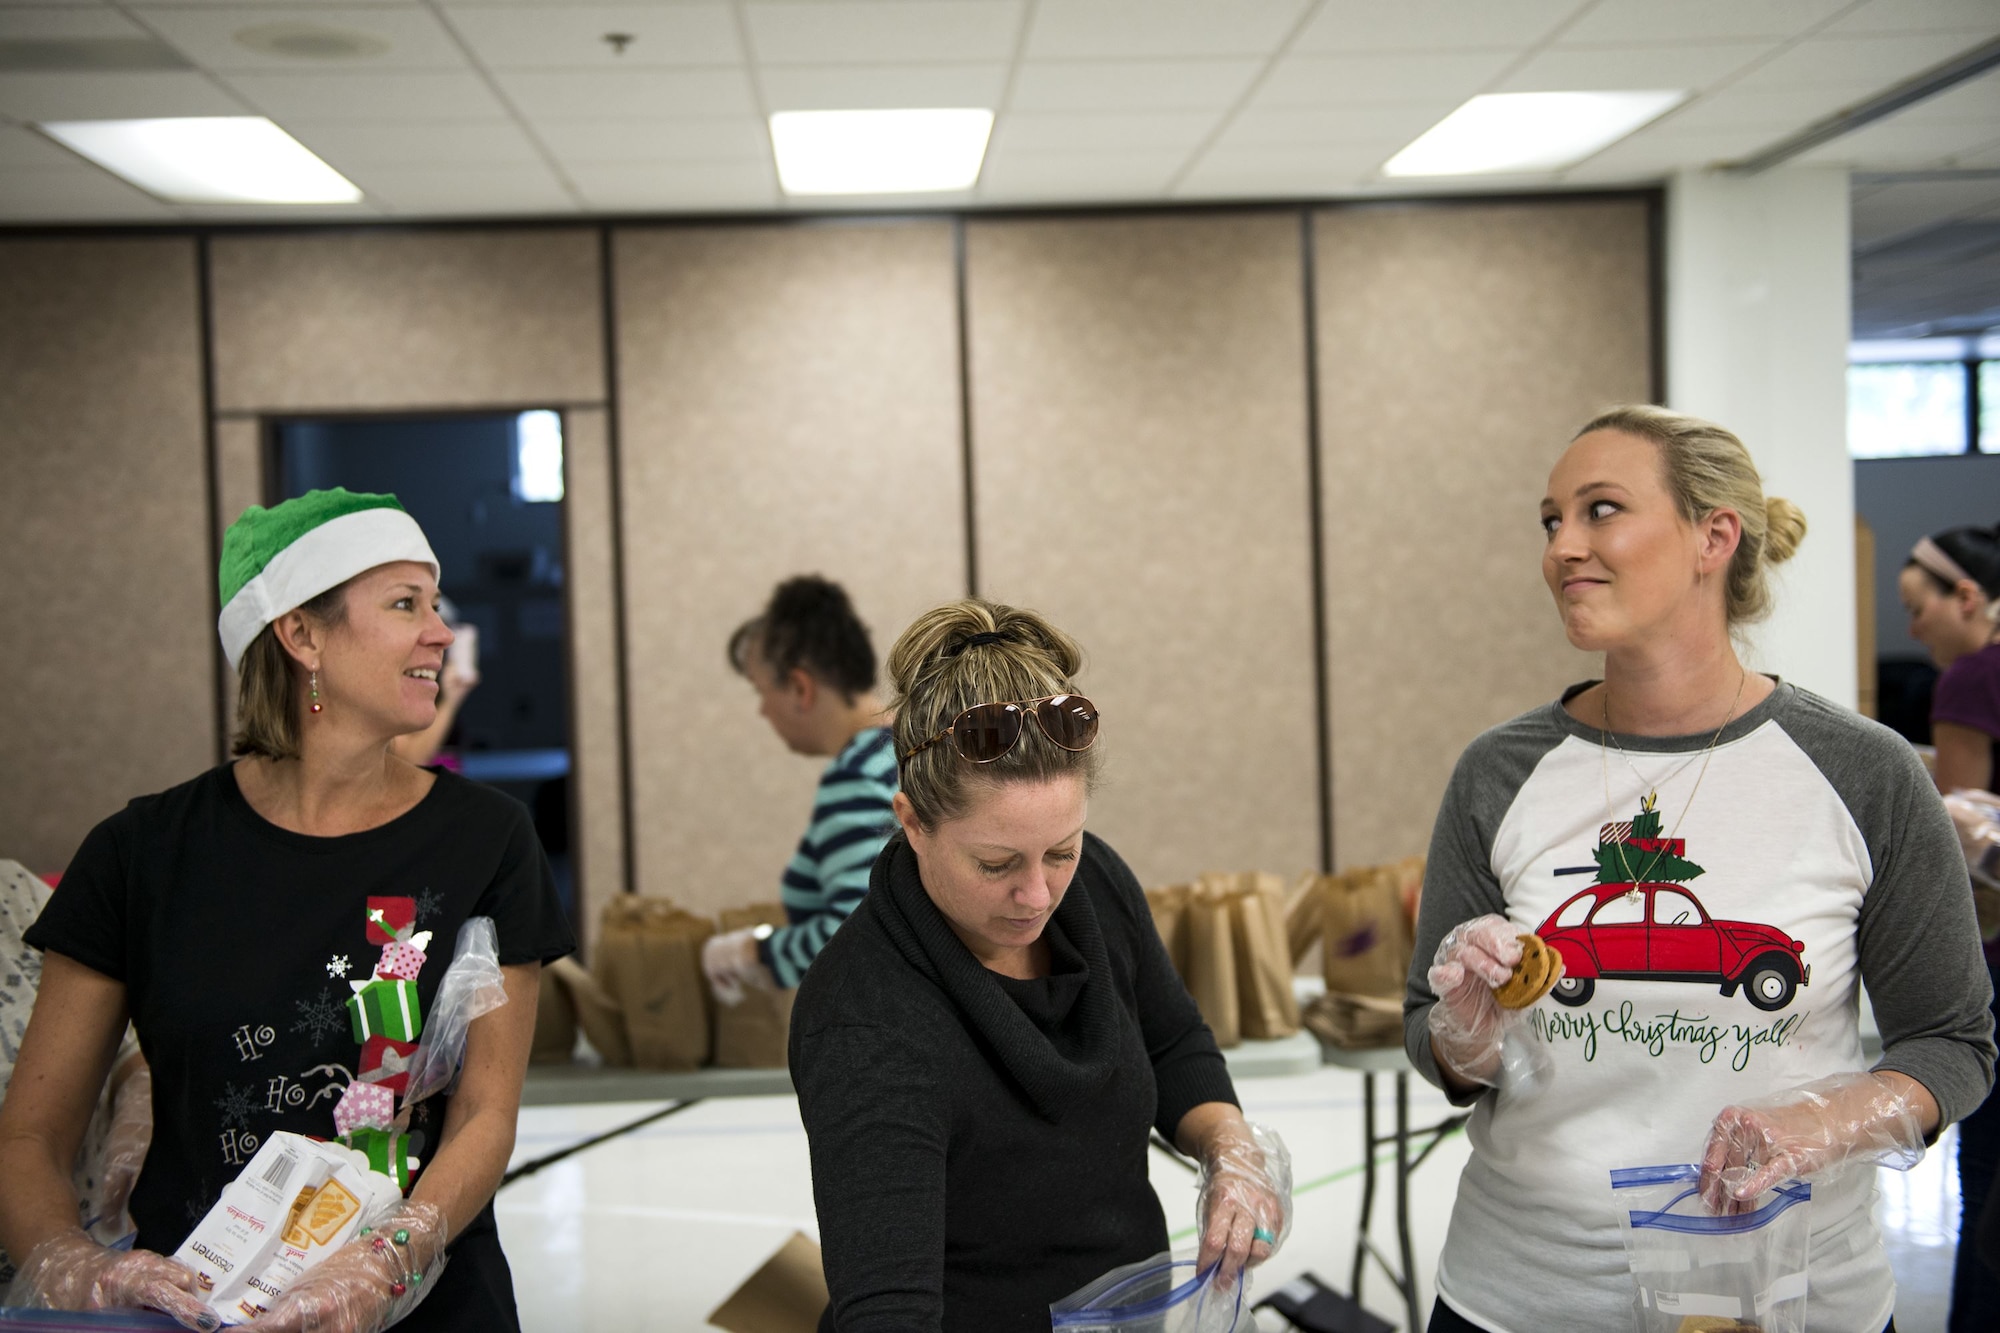 Marcie Chastain, left, Rena Hall, and Elaine McPherson, Team Moody military spouses, pack cookies into bags during the Annual Moody Airmen Cookie Drive, Dec. 4, 2017, at Moody Air Force Base, Ga. Local organizations, Airmen and spouses donated more than 8,000 cookies to approximately 700 dorm residents to show appreciation for the Airmen during the holidays. (U.S. Air Force photo by Airman 1st Class Erick Requadt)